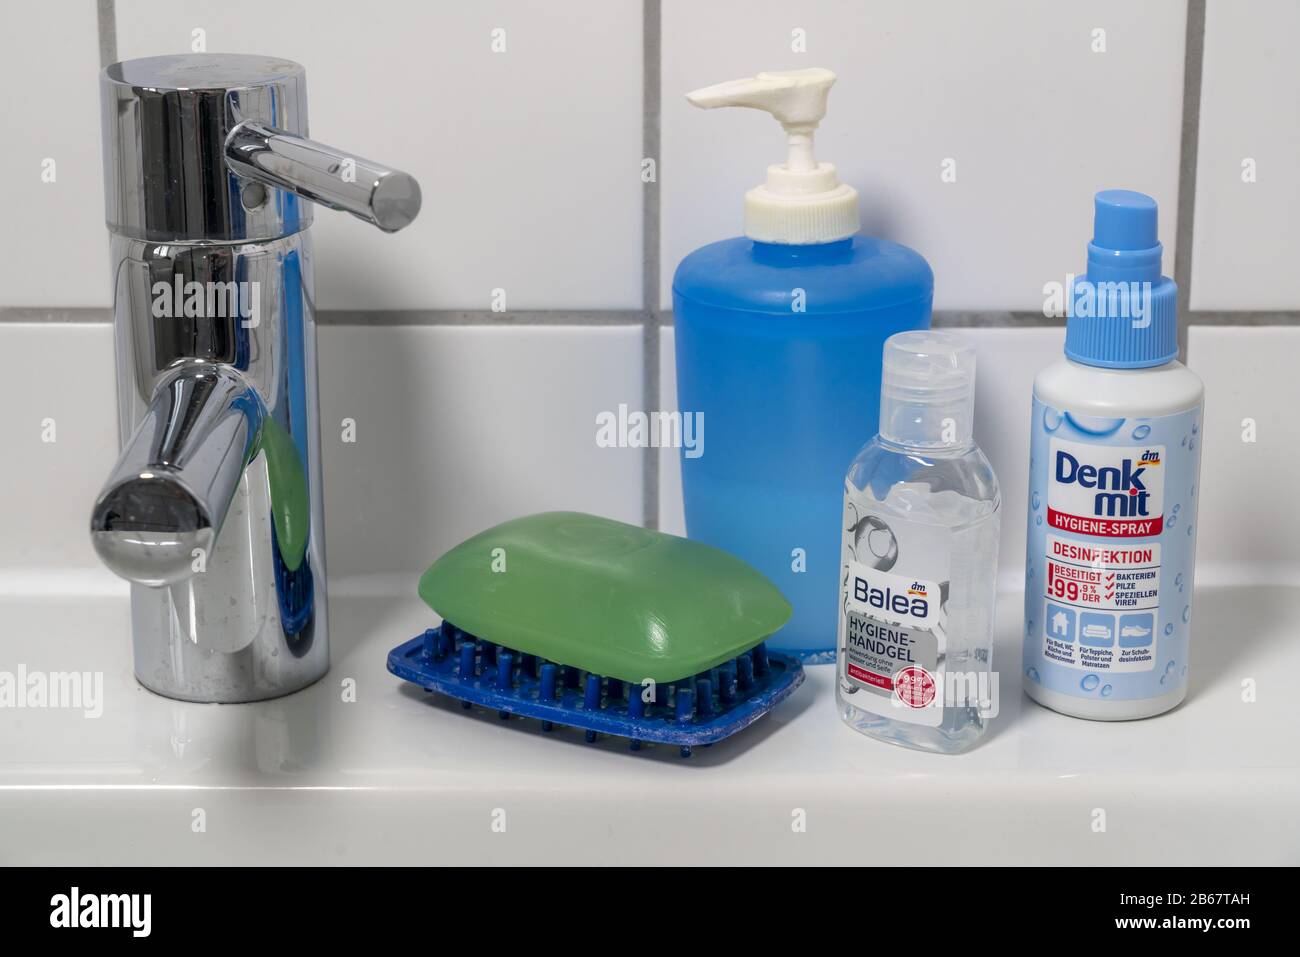 Domestic hygiene, washing hands, hygiene hand gel, bar of soap, liquid soap from the soap dispenser, disinfection spray, Stock Photo